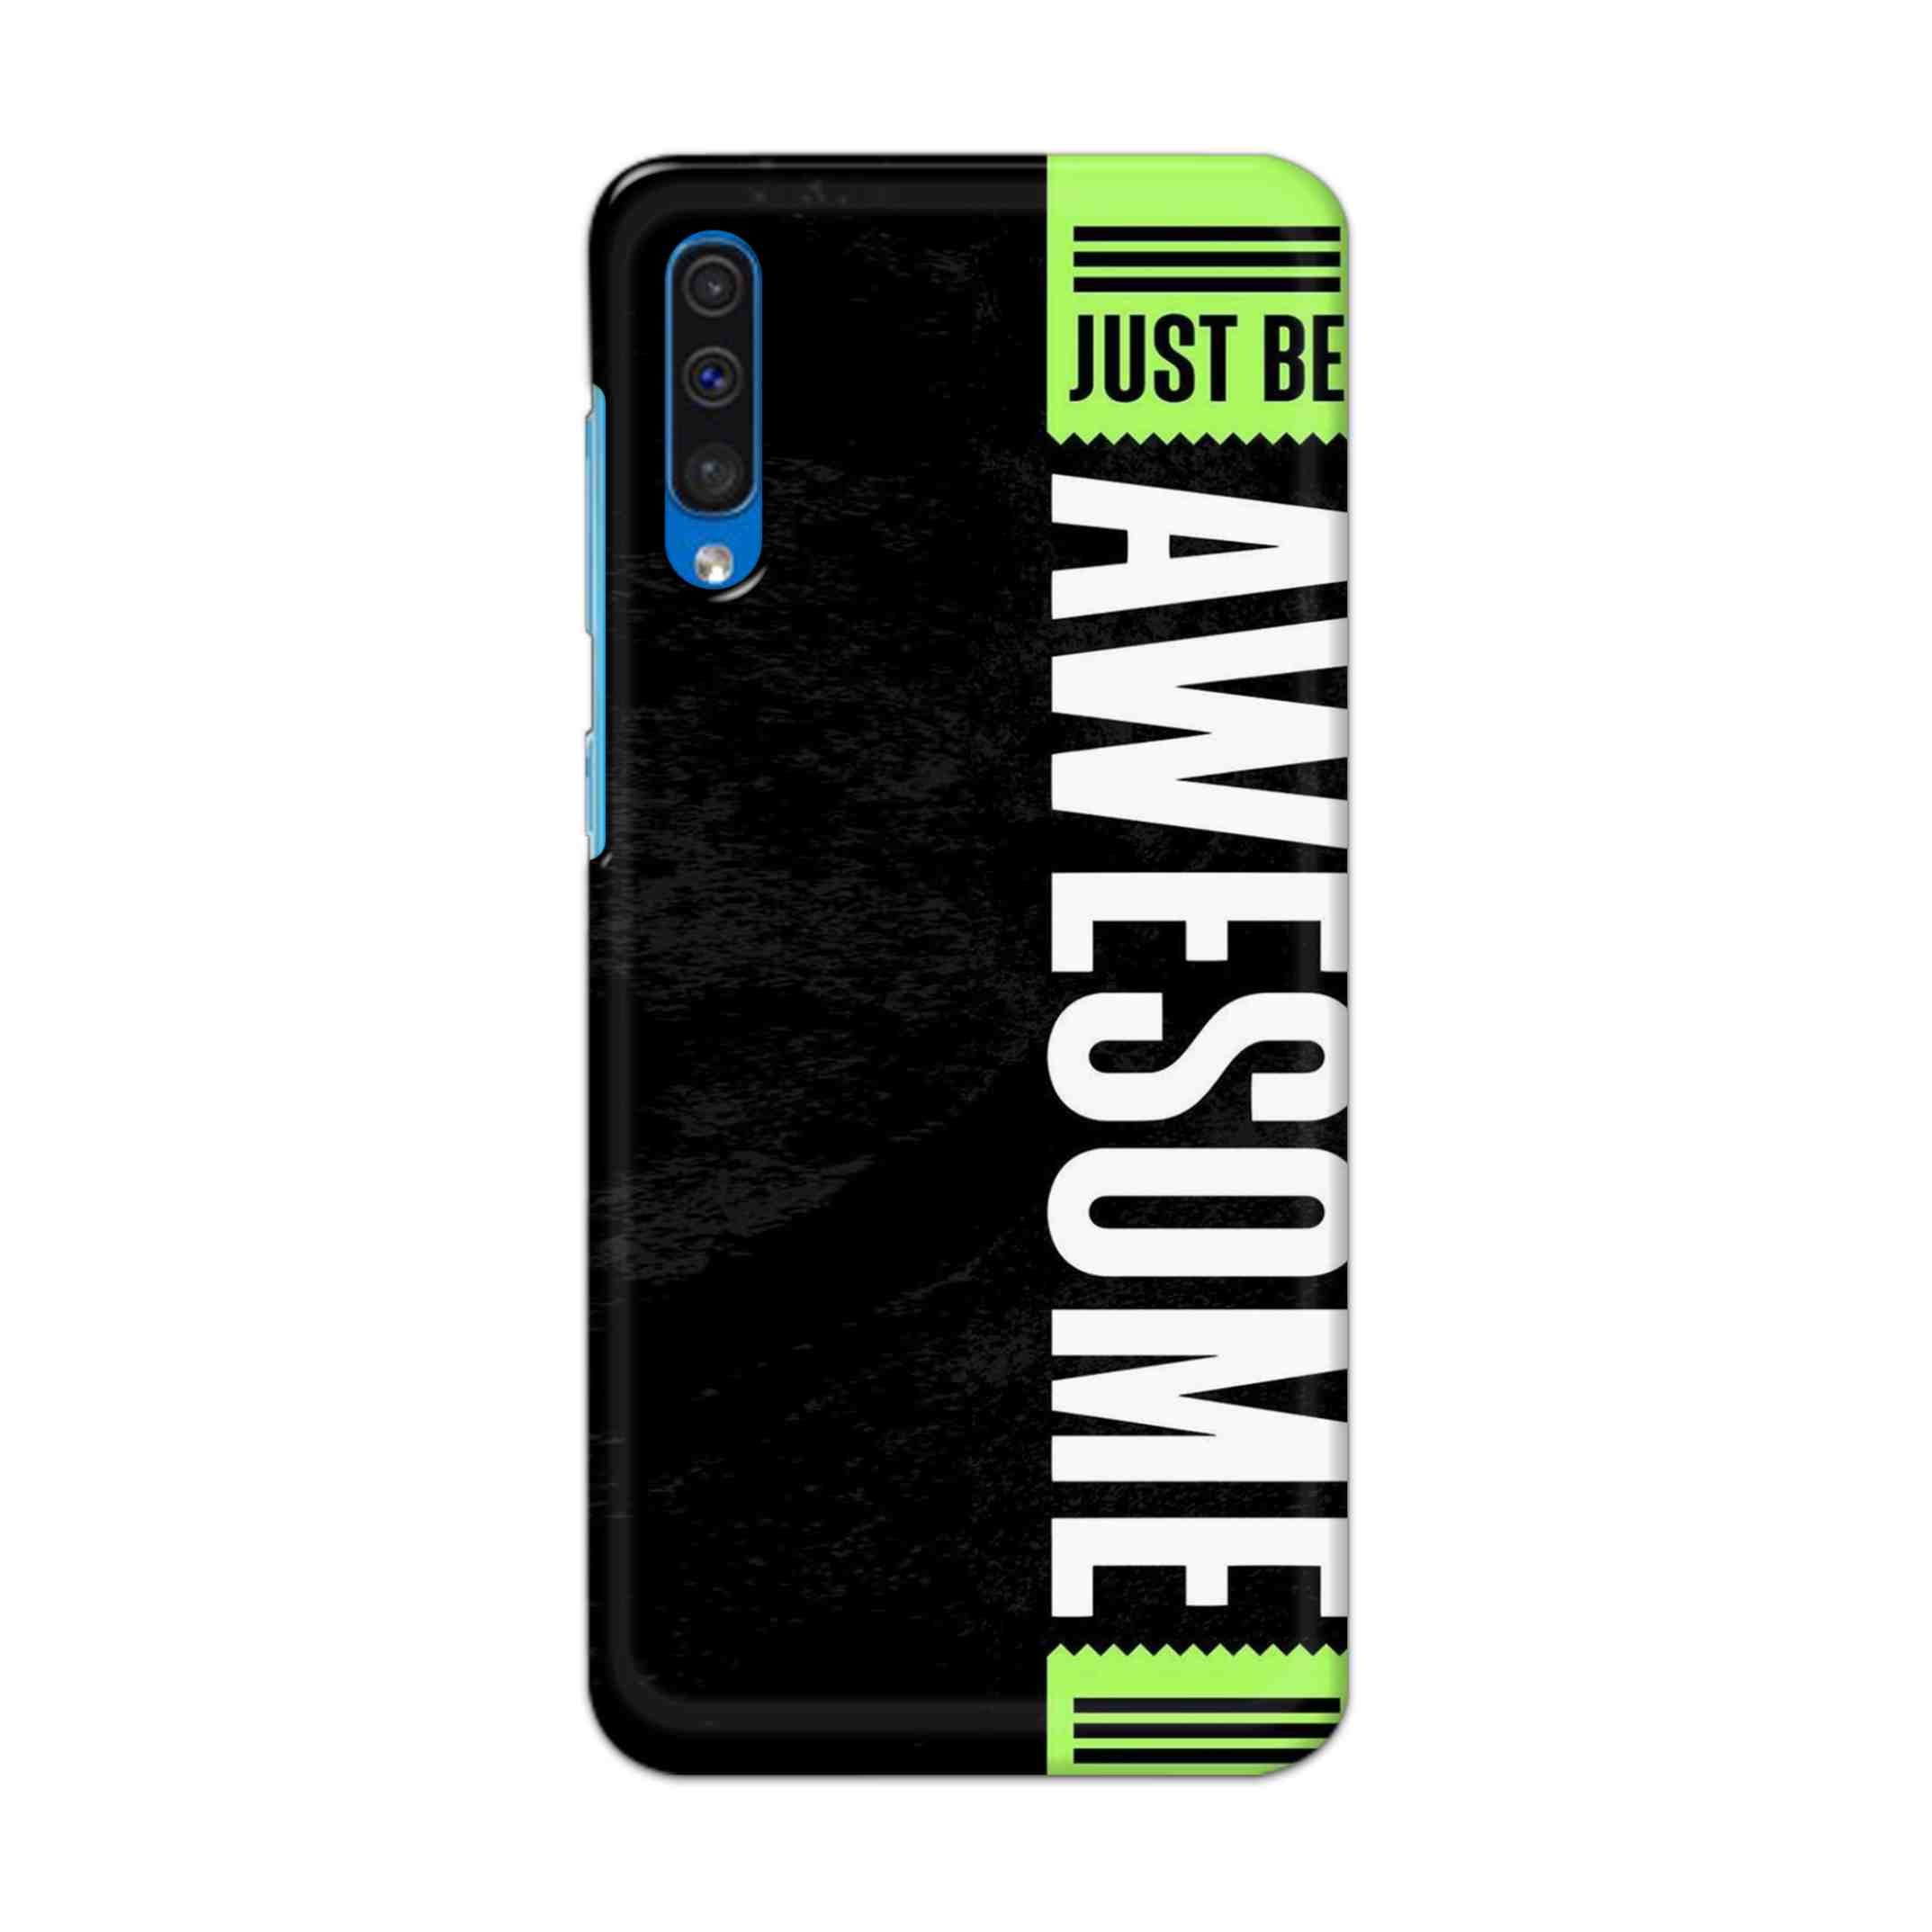 Buy Awesome Street Hard Back Mobile Phone Case Cover For Samsung Galaxy A50 / A50s / A30s Online